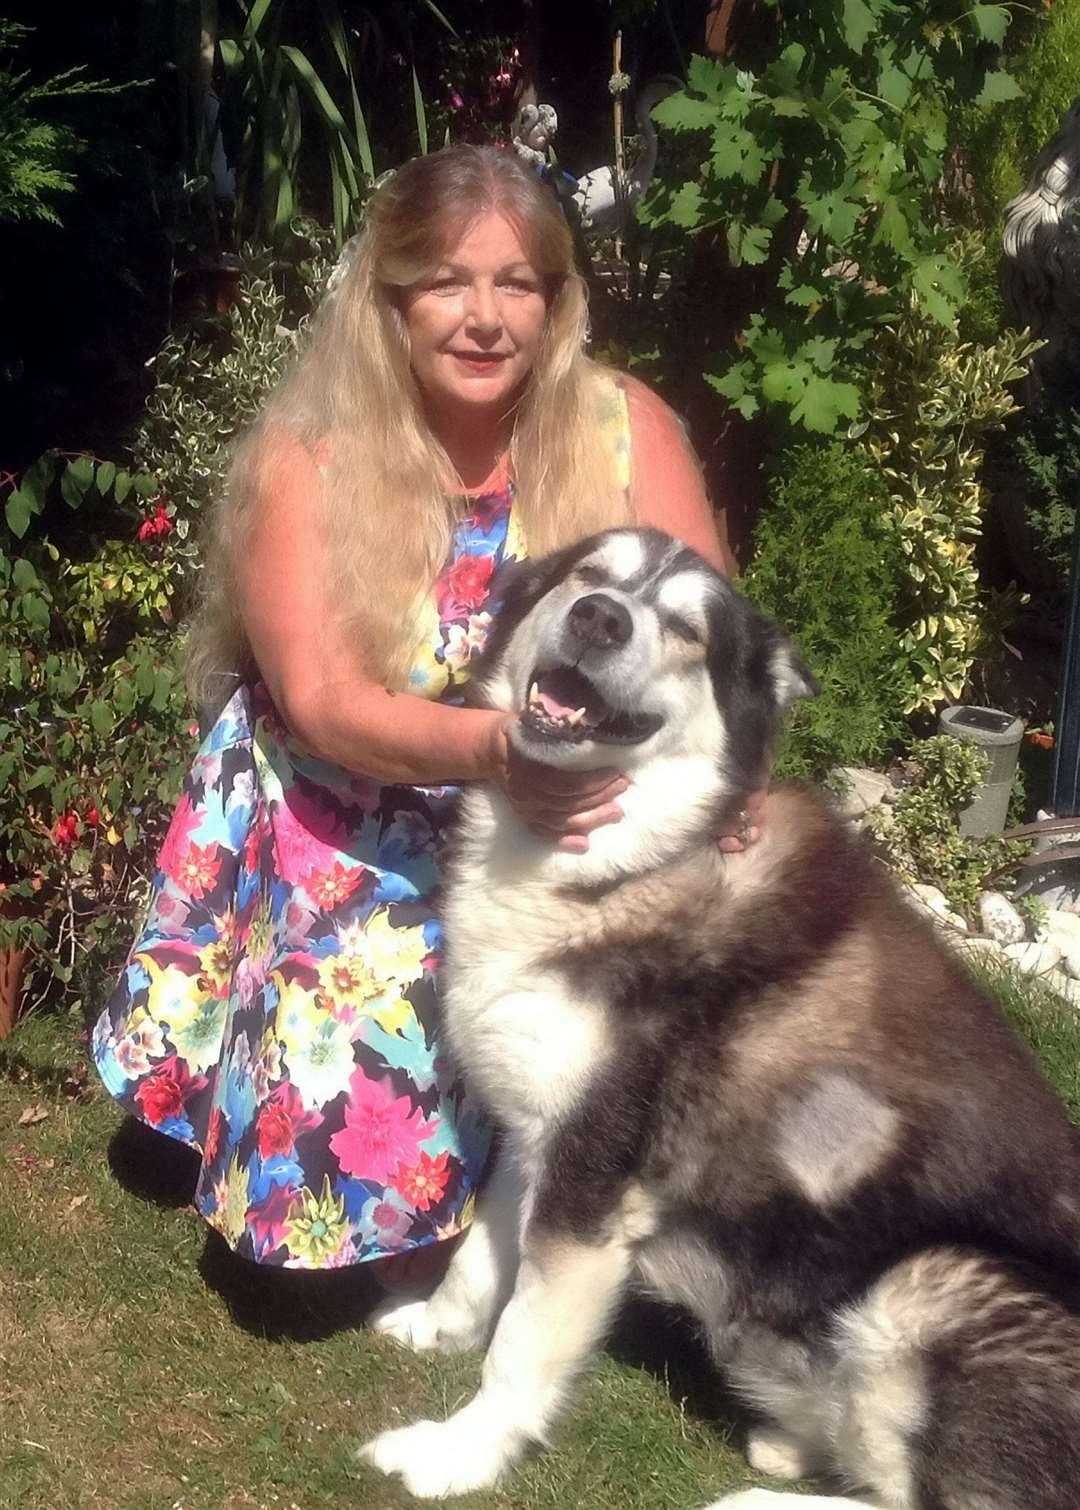 Mandy Hayes, from Gravesend, and her beloved dog Mushka - who is possibly the first dog in Britain to have caught Covid-19. Picture: Mandy Hayes